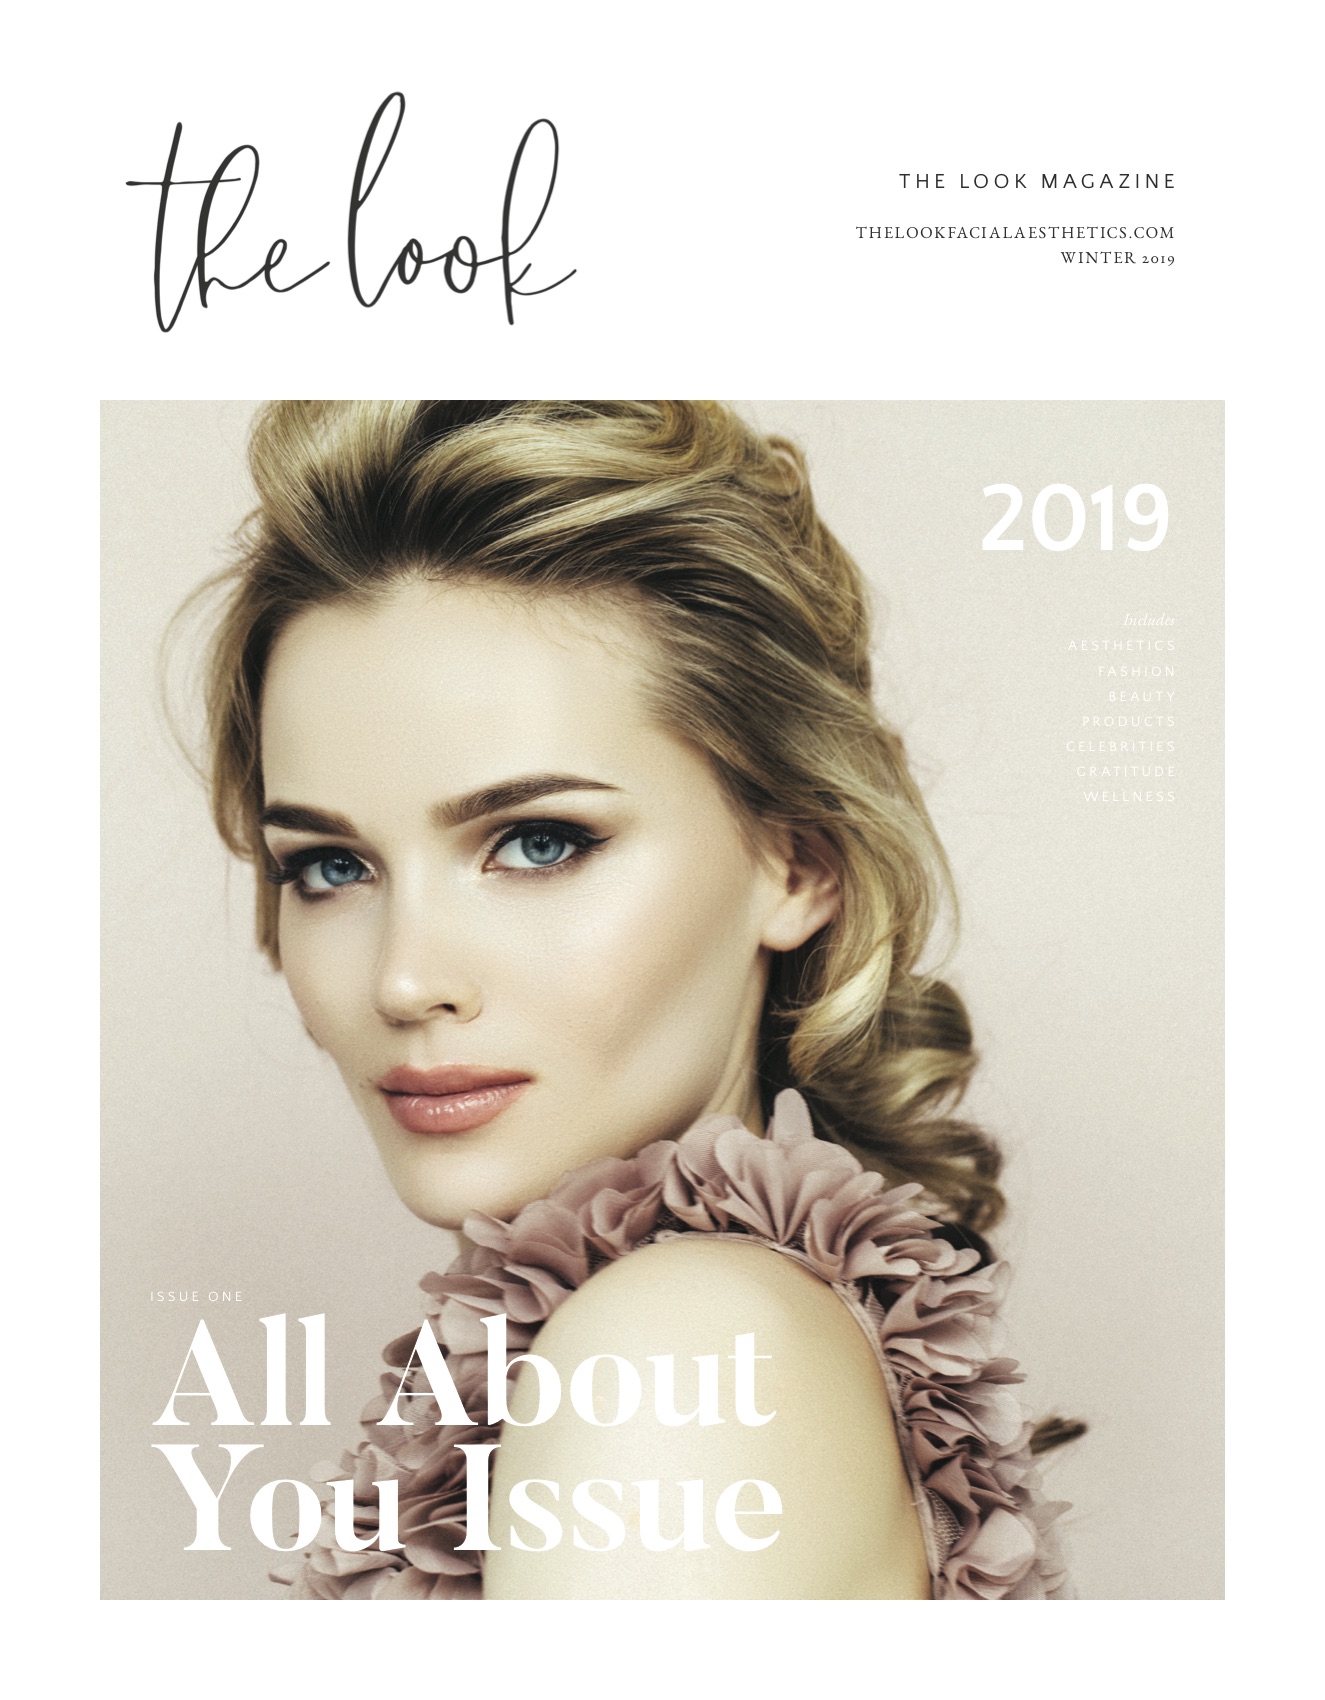 The Look issue one